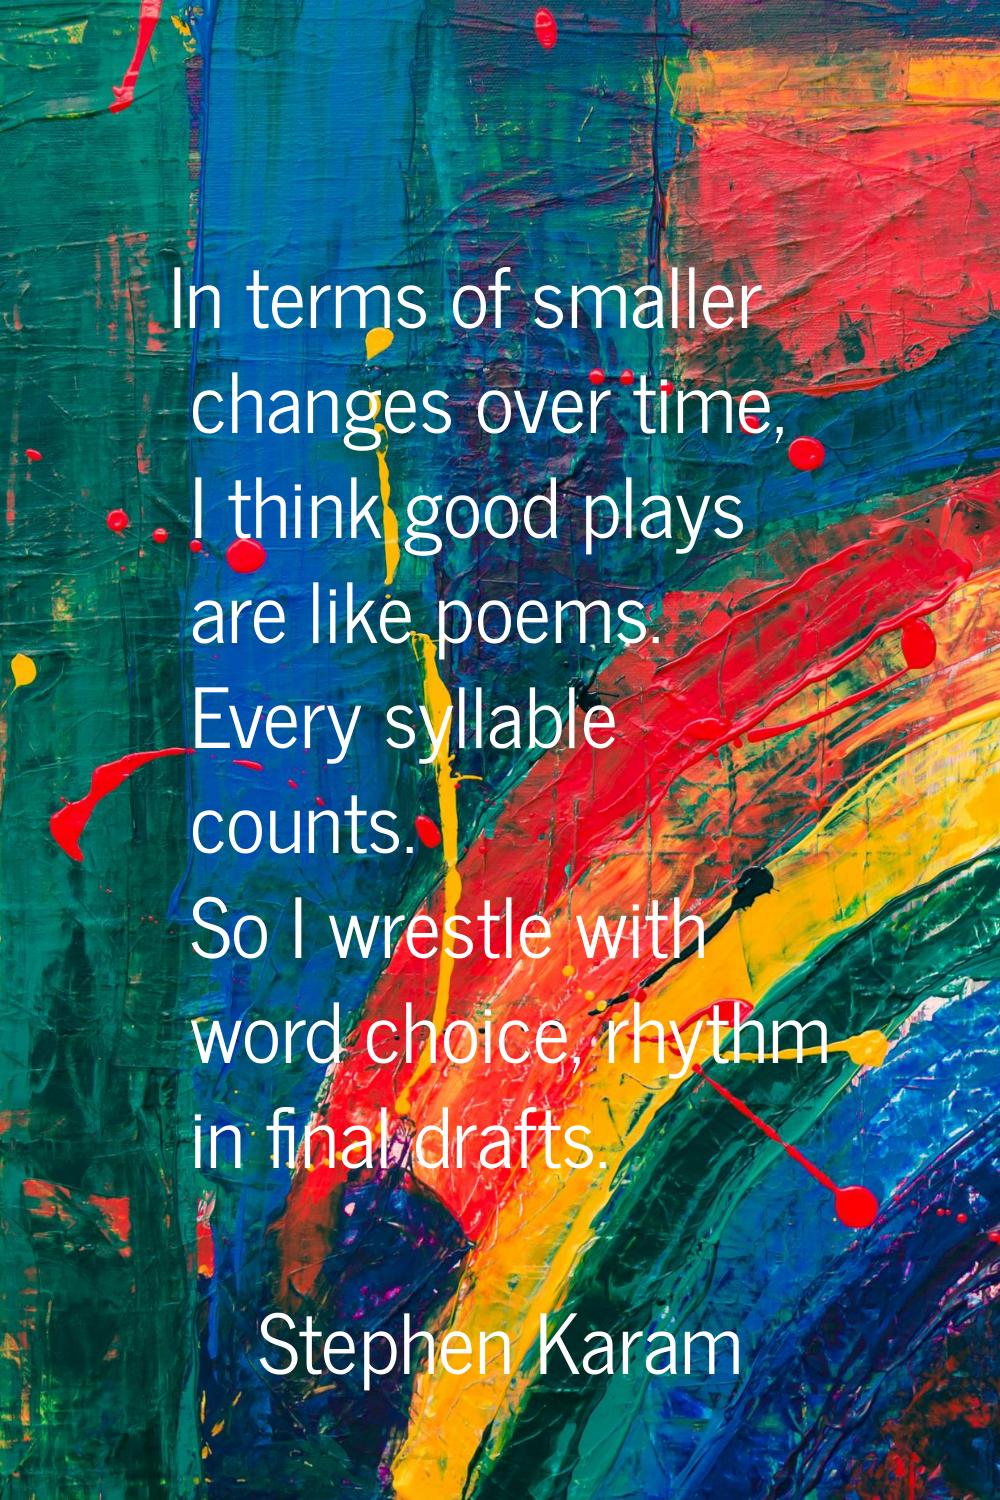 In terms of smaller changes over time, I think good plays are like poems. Every syllable counts. So